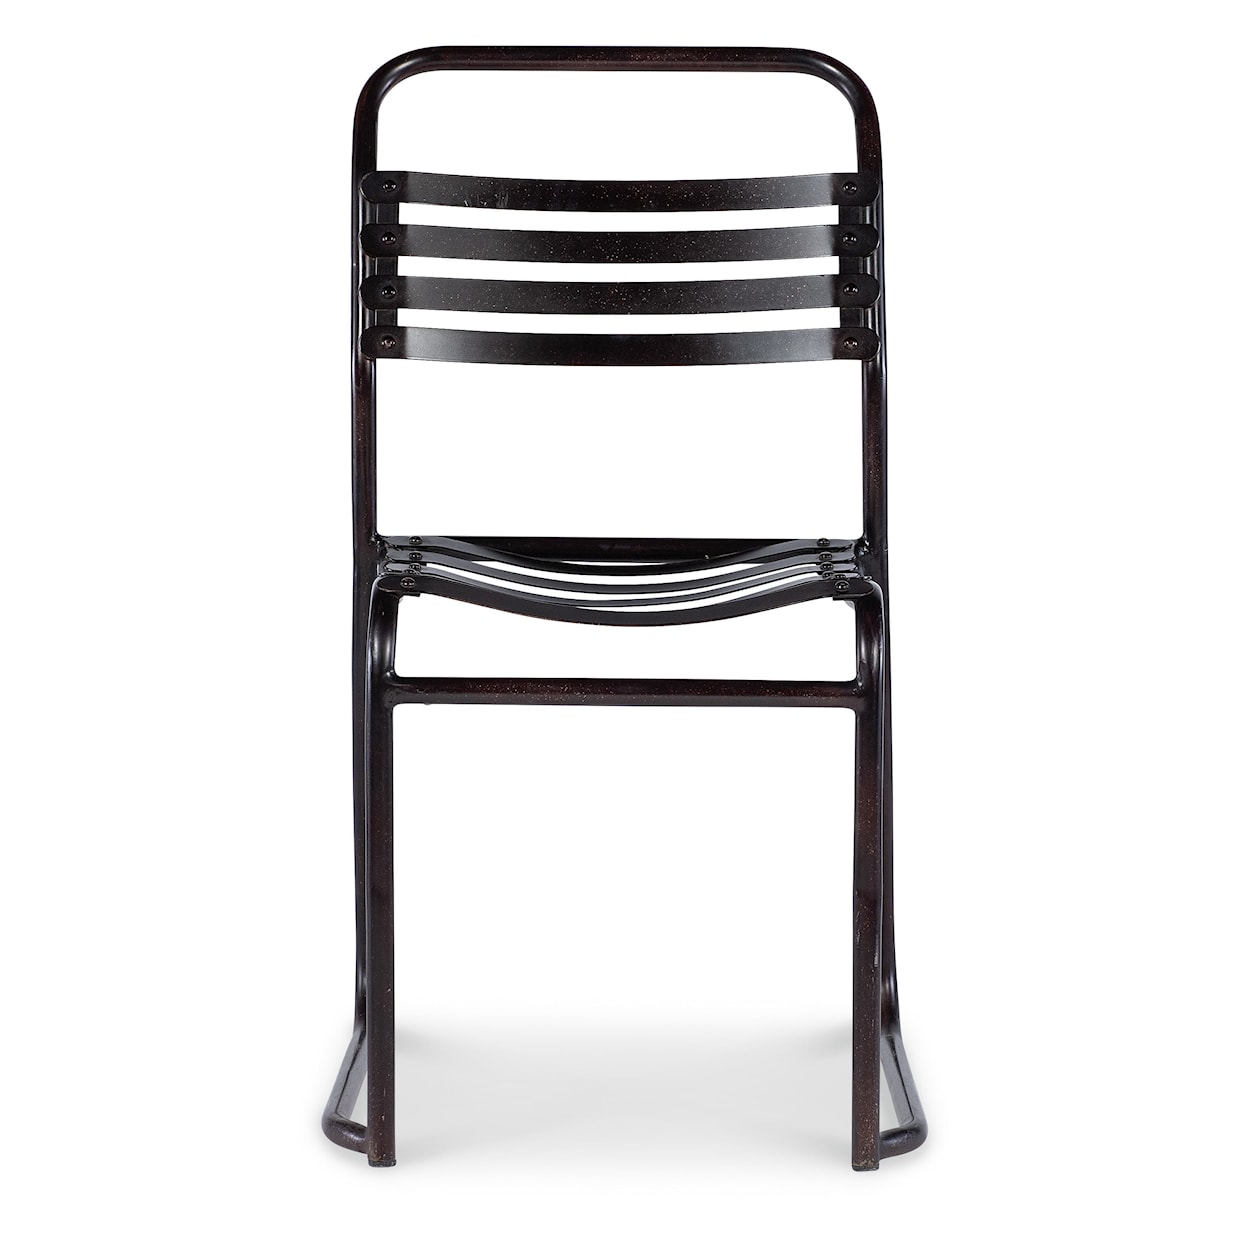 BOBO Intriguing Objects BOBO Intriguing Objects Rubber Slatted Stacking Chair